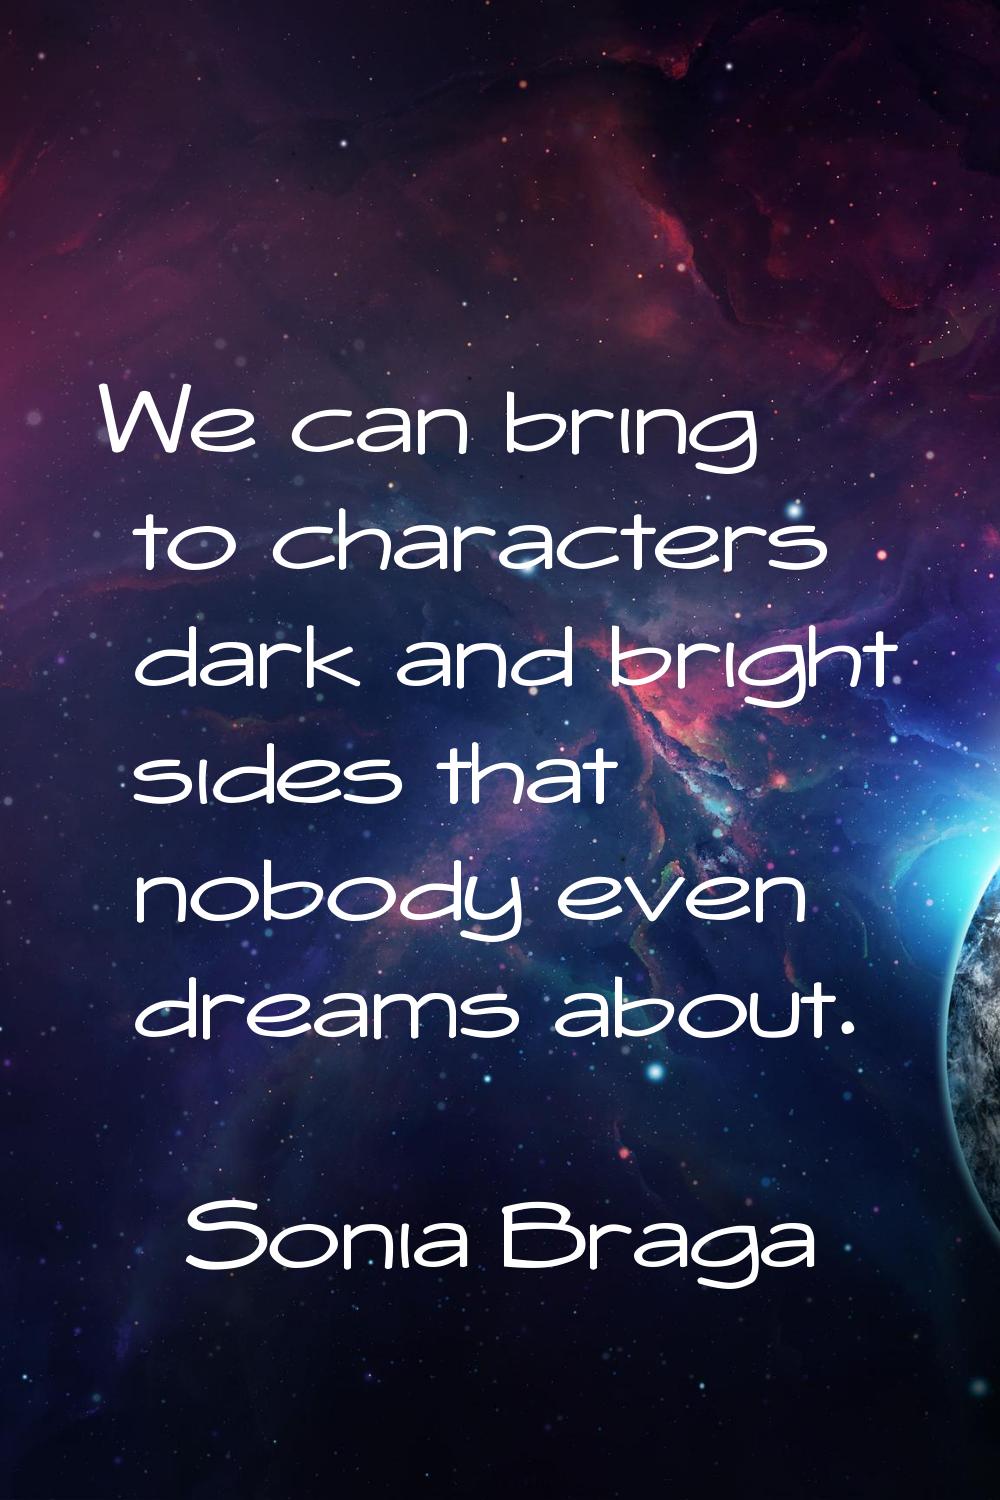 We can bring to characters dark and bright sides that nobody even dreams about.